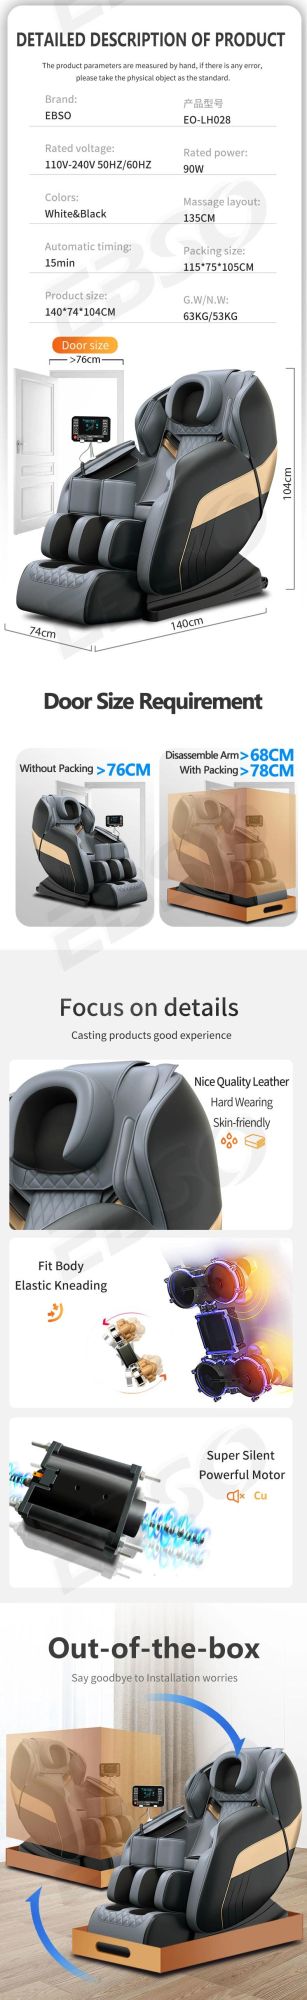 3D Massage Chair with Foot Rollers Massage / Zero Gravity Massage Chair / Chair Massage Family Applicable Version